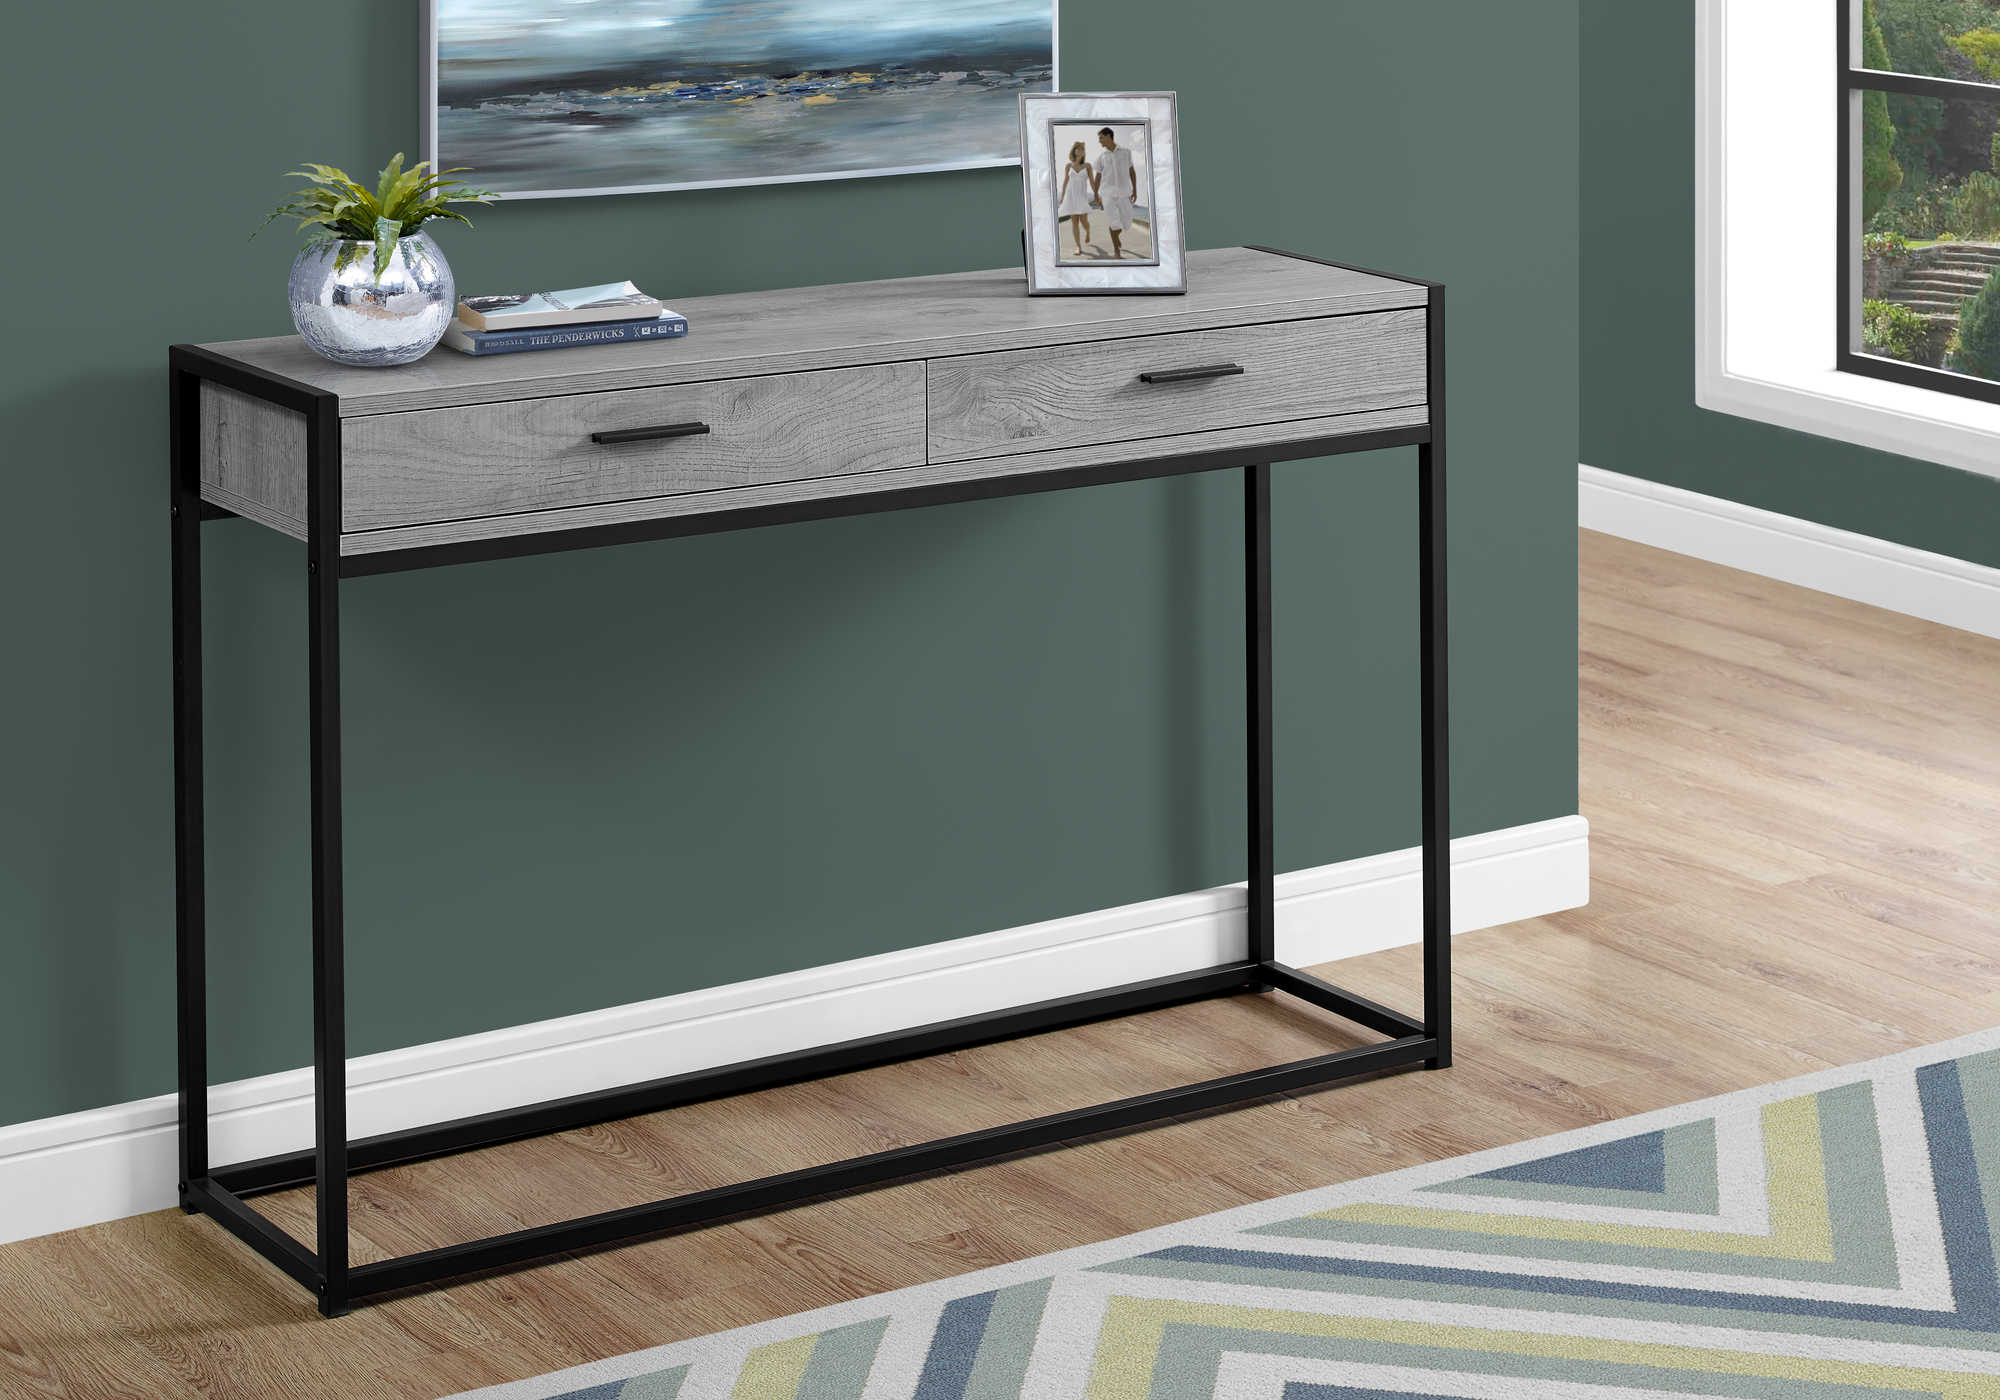 BEDROOM ACCENT CONSOLE TABLE - 48"L / GREY / BLACK METAL HALL CONSOLE